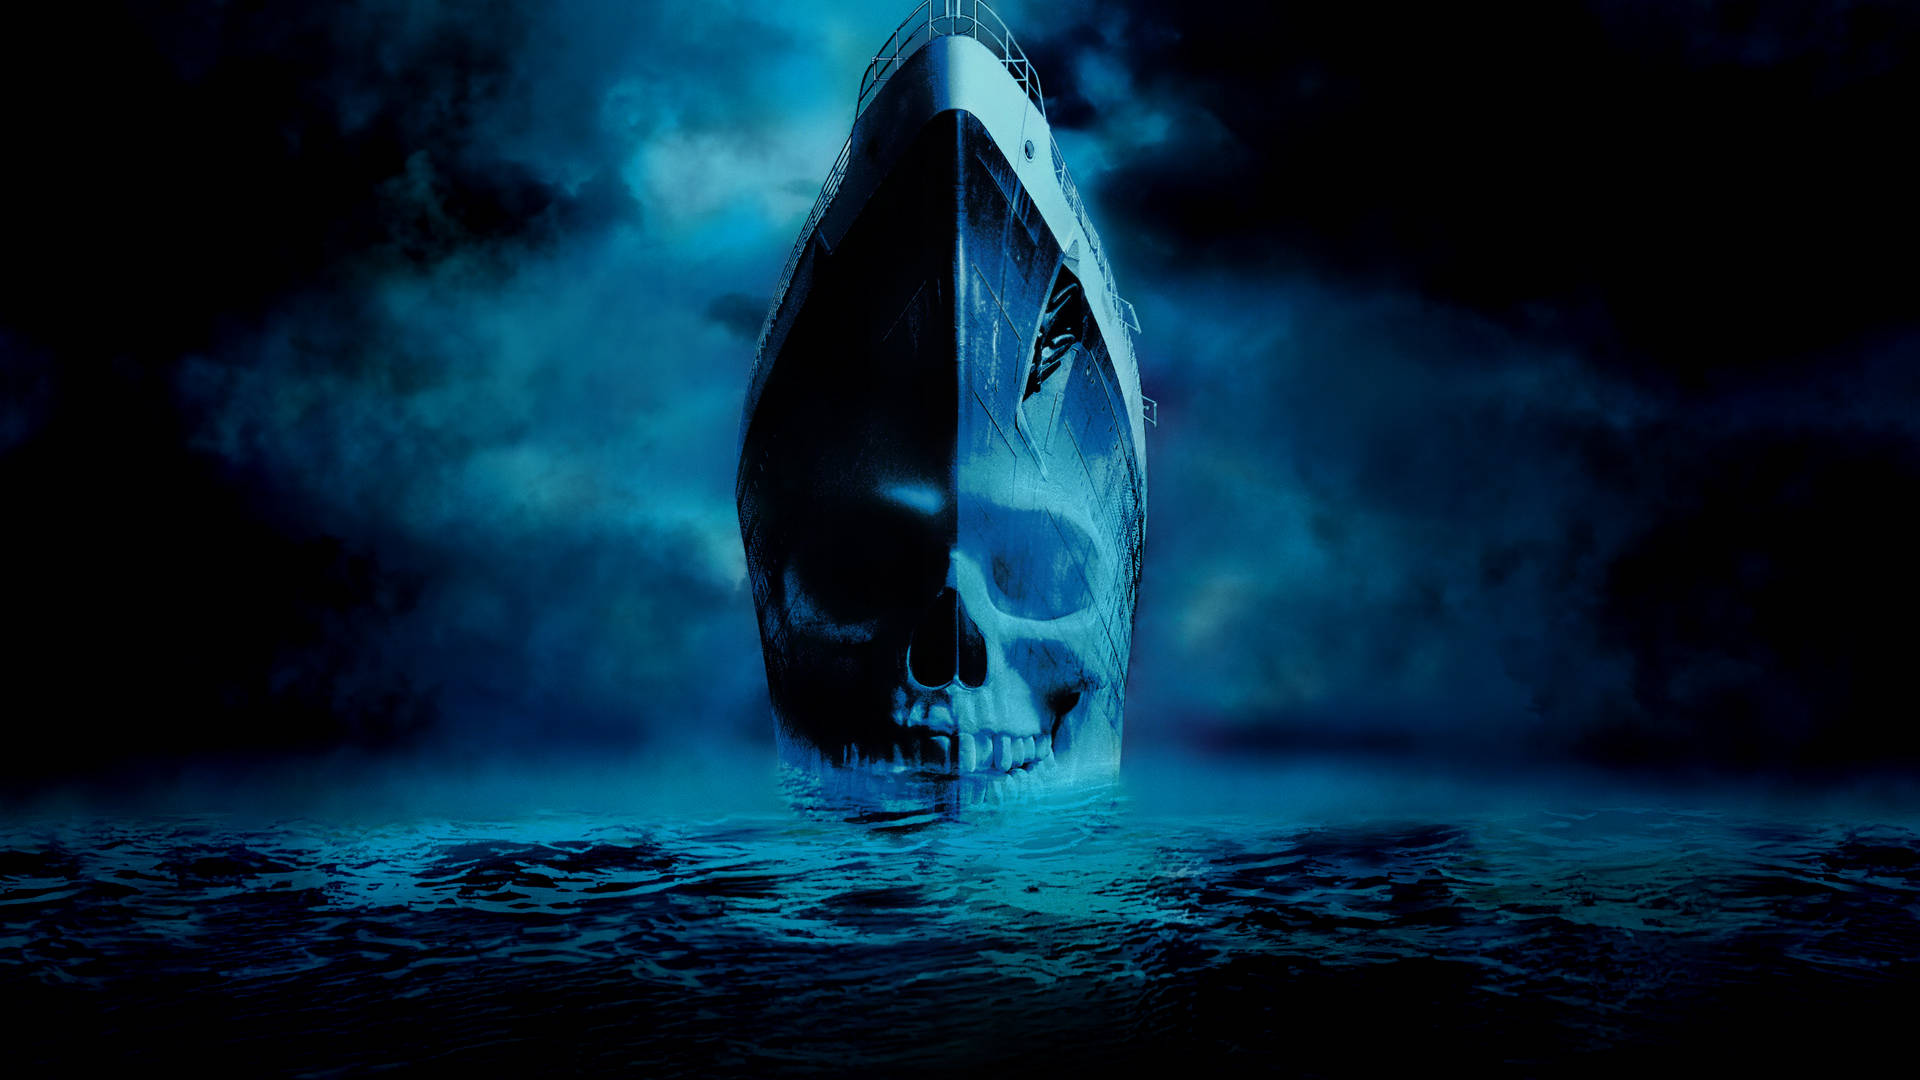 Ghost Ship Wallpaper Images